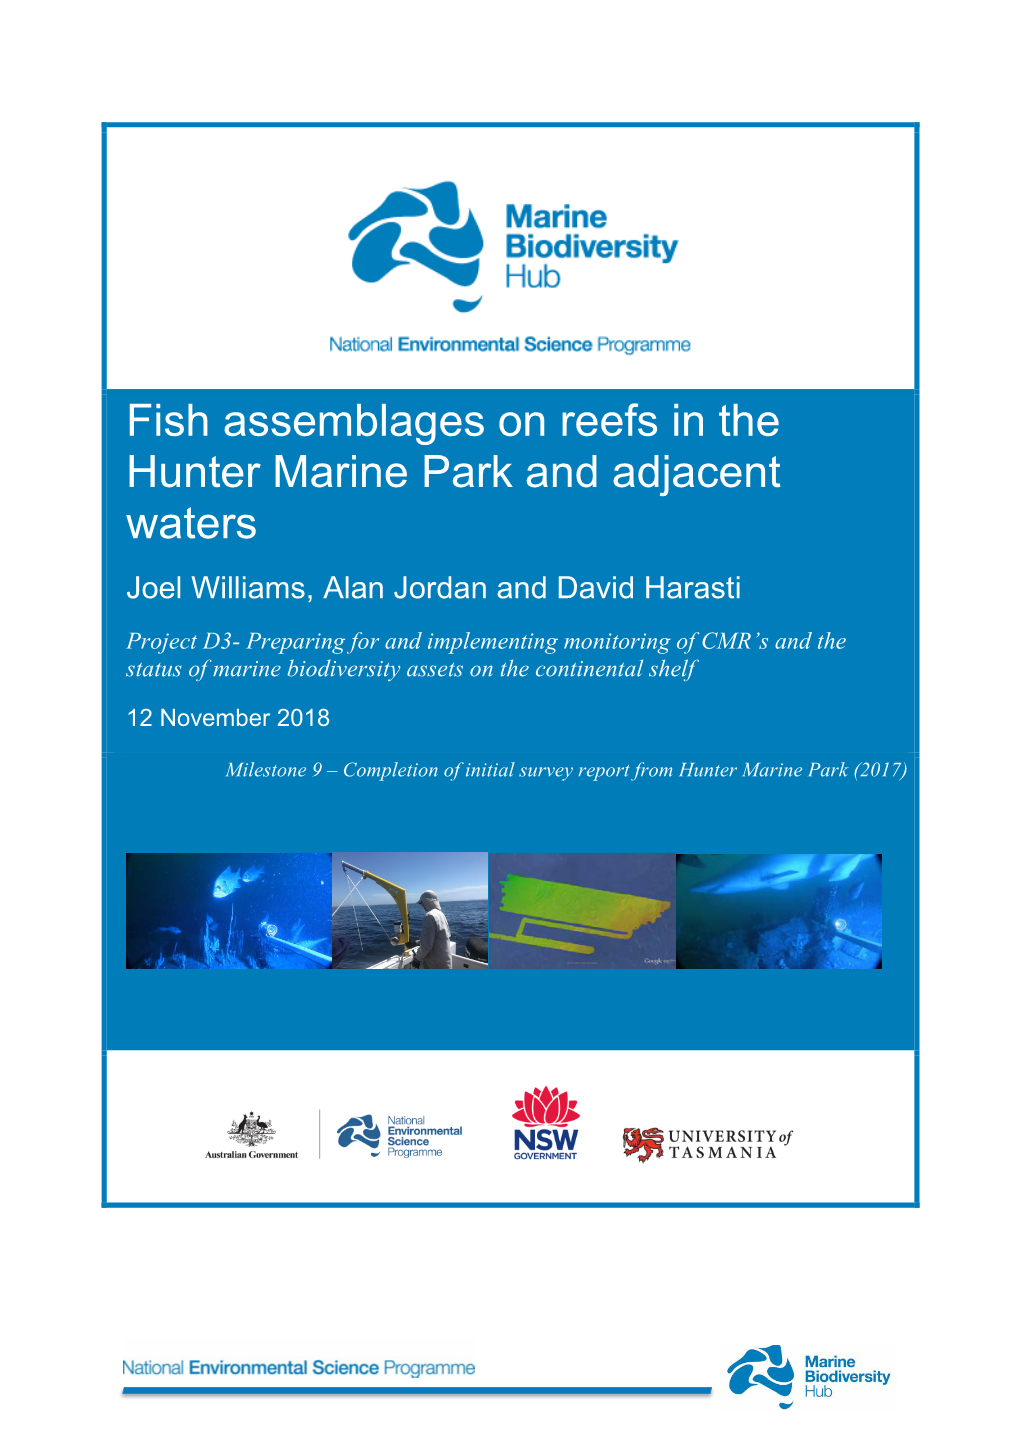 Fish Assemblages on Reefs in the Hunter Marine Park and Adjacent Waters